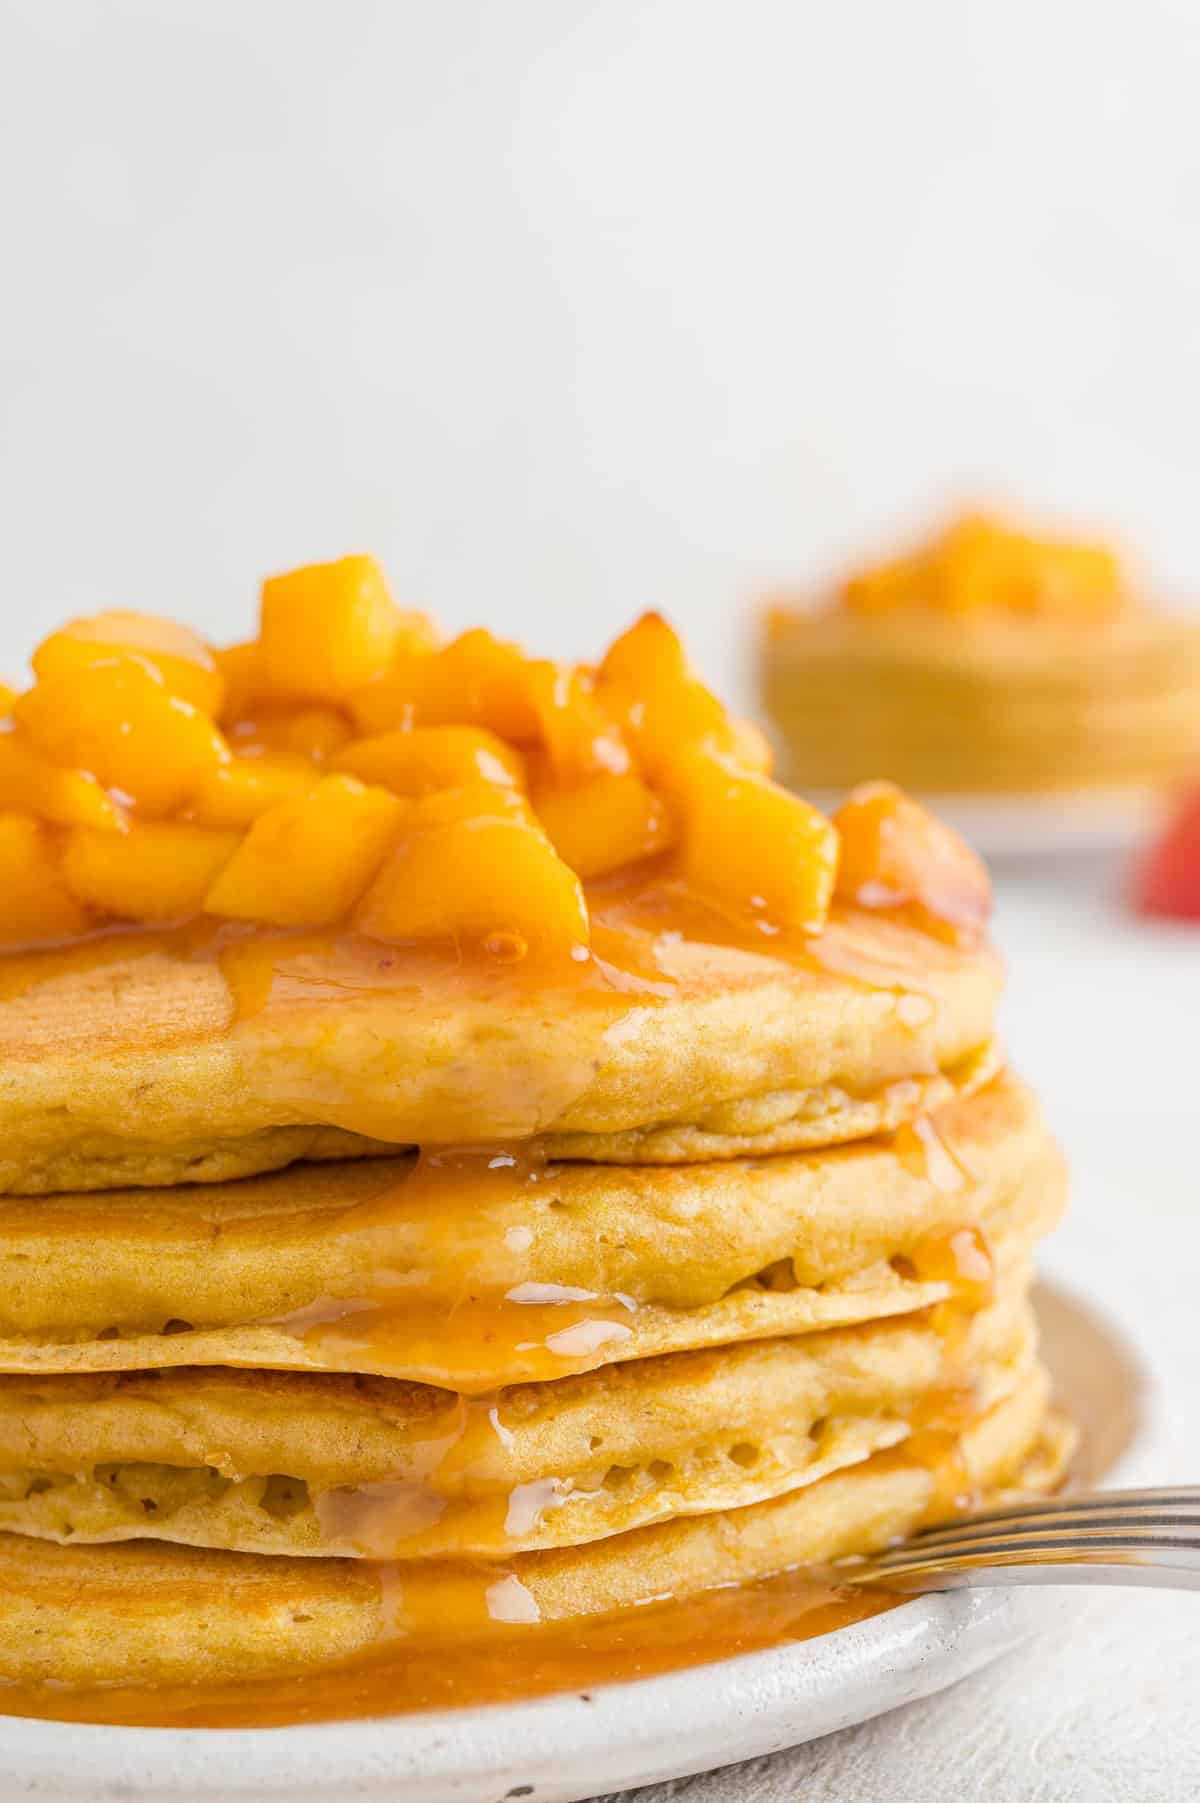 Peach sauce on a tall stack of peach pancakes.